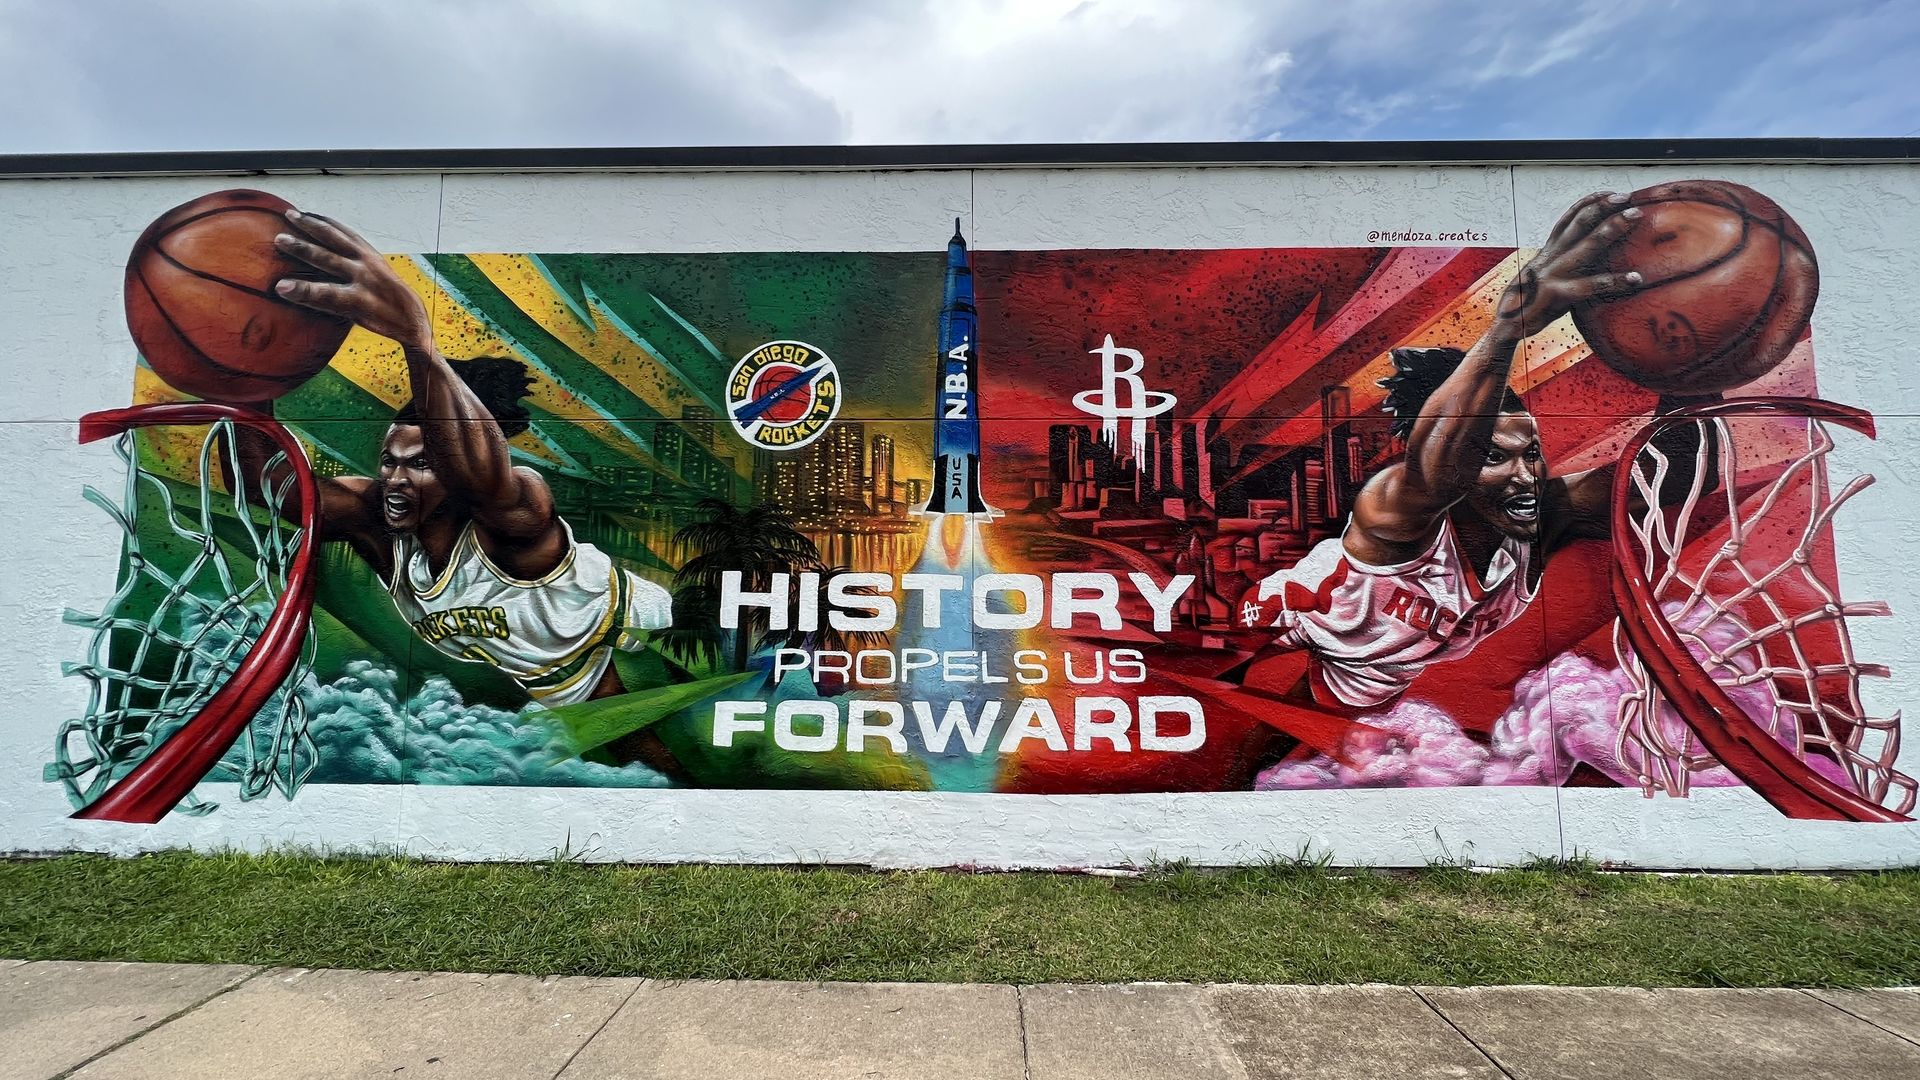 A green, gold and red mural dedicating the Houston Rockets' new jerseys painted on the side of a vacant building